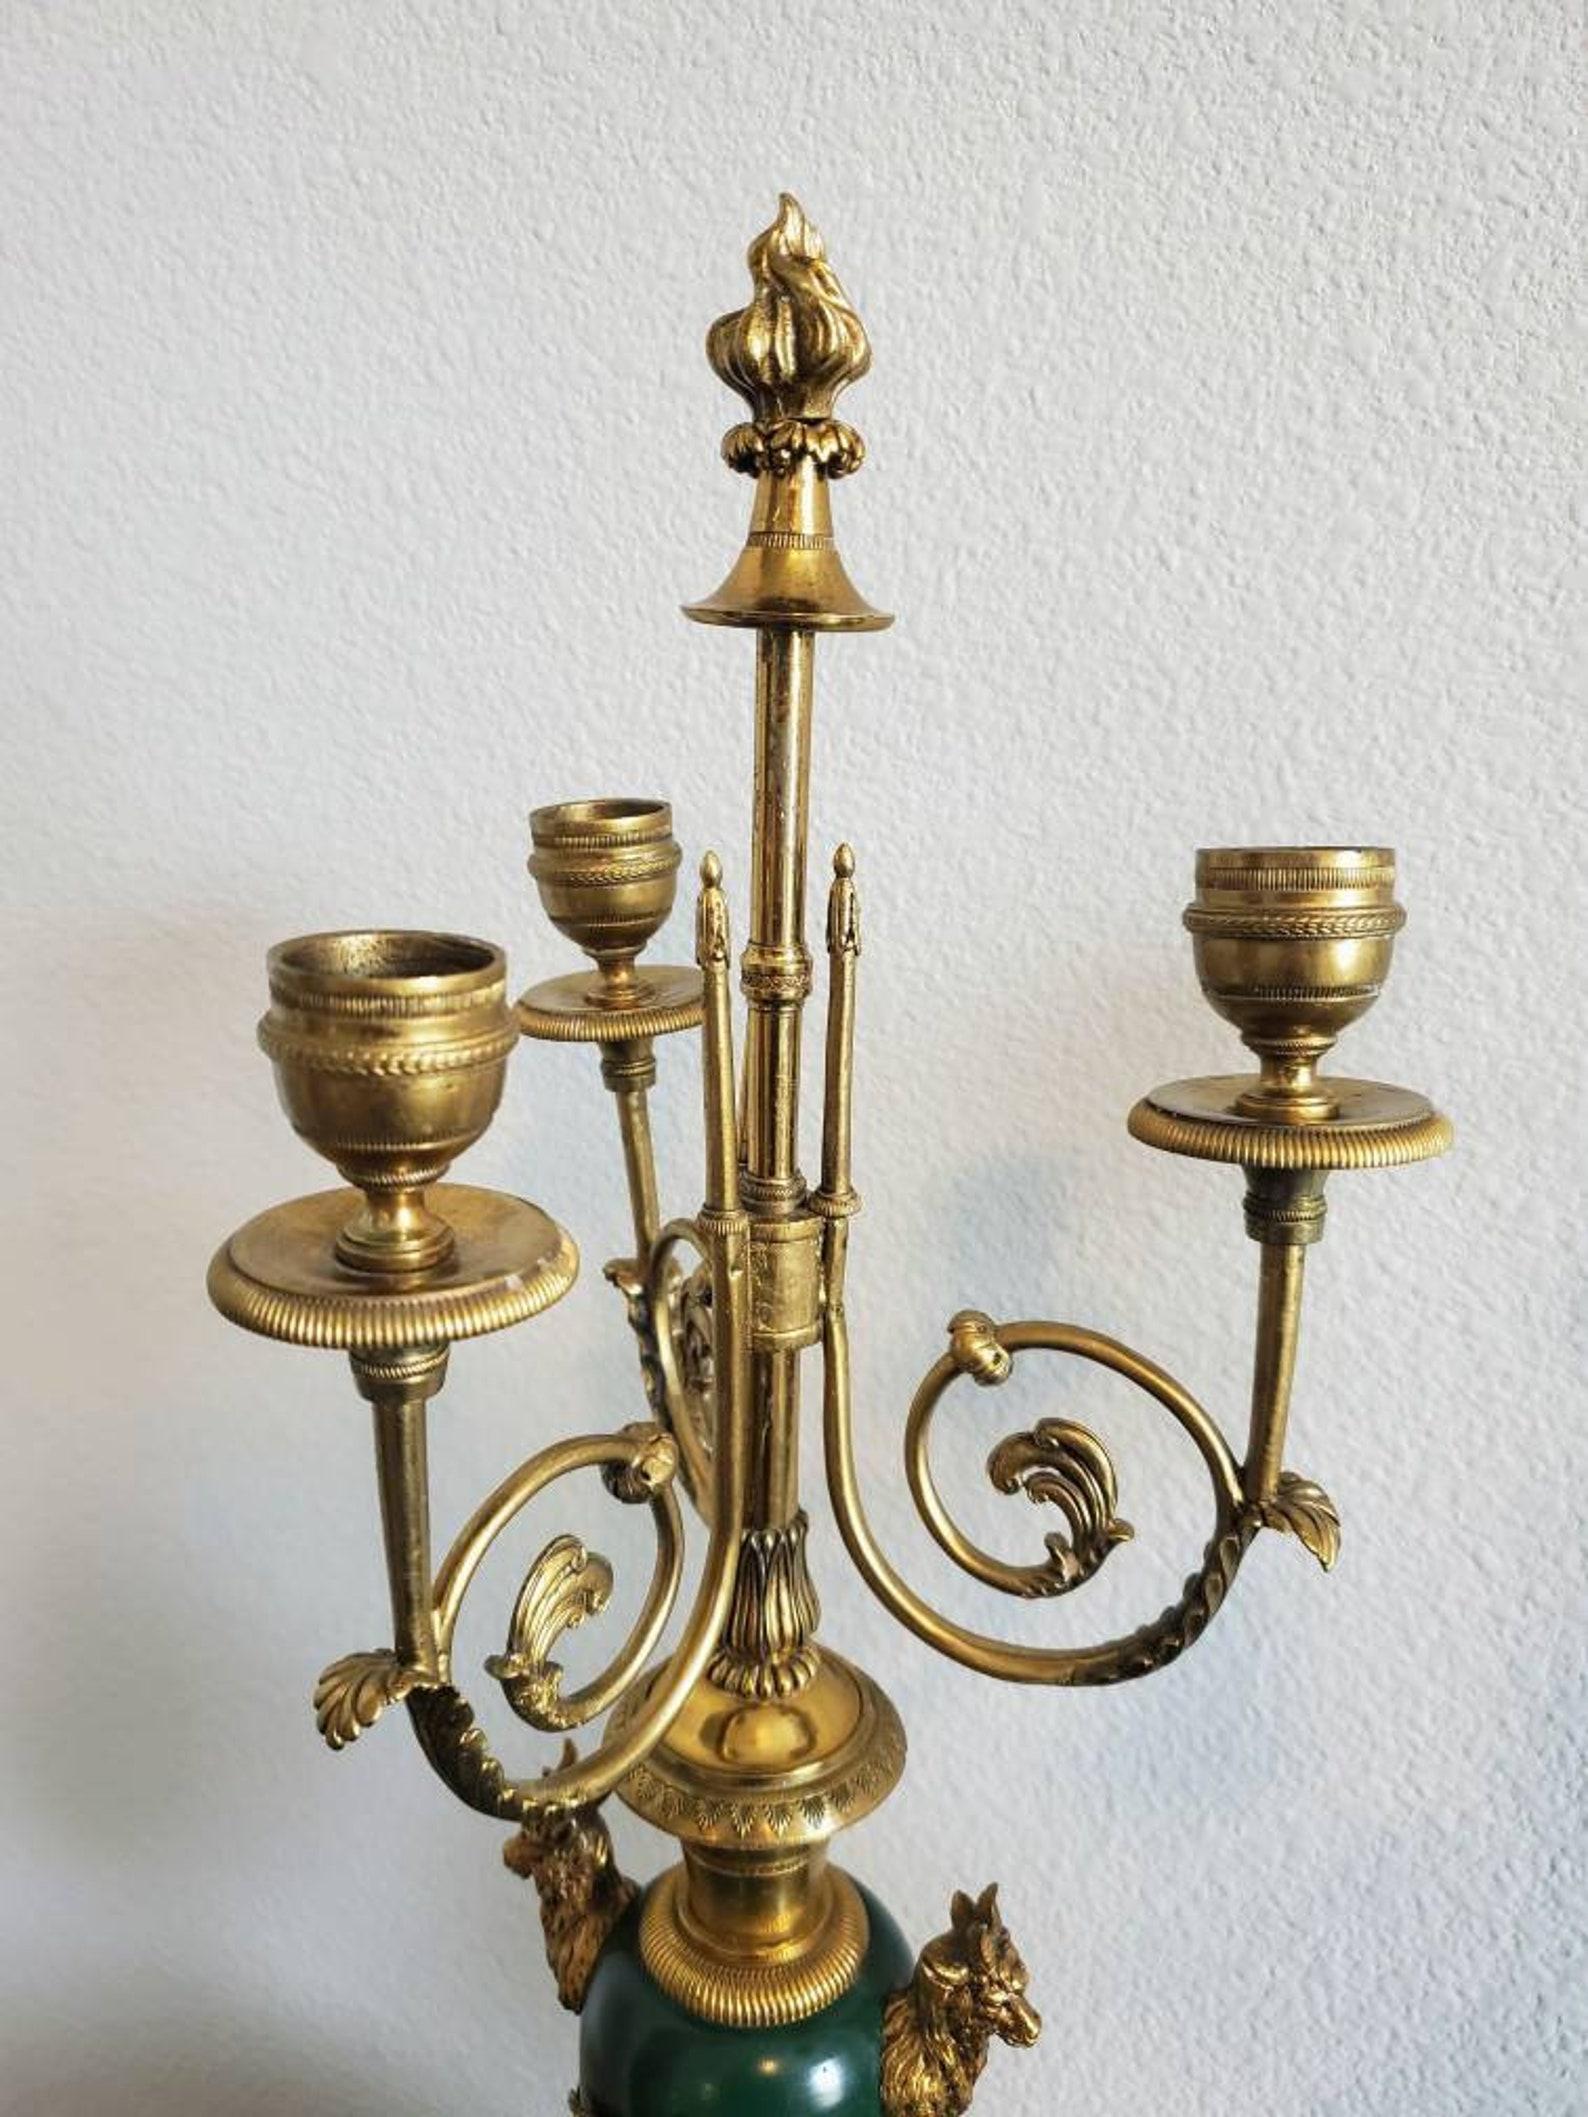 Pair of Early 19th Century French Empire Period Candelabras For Sale 5